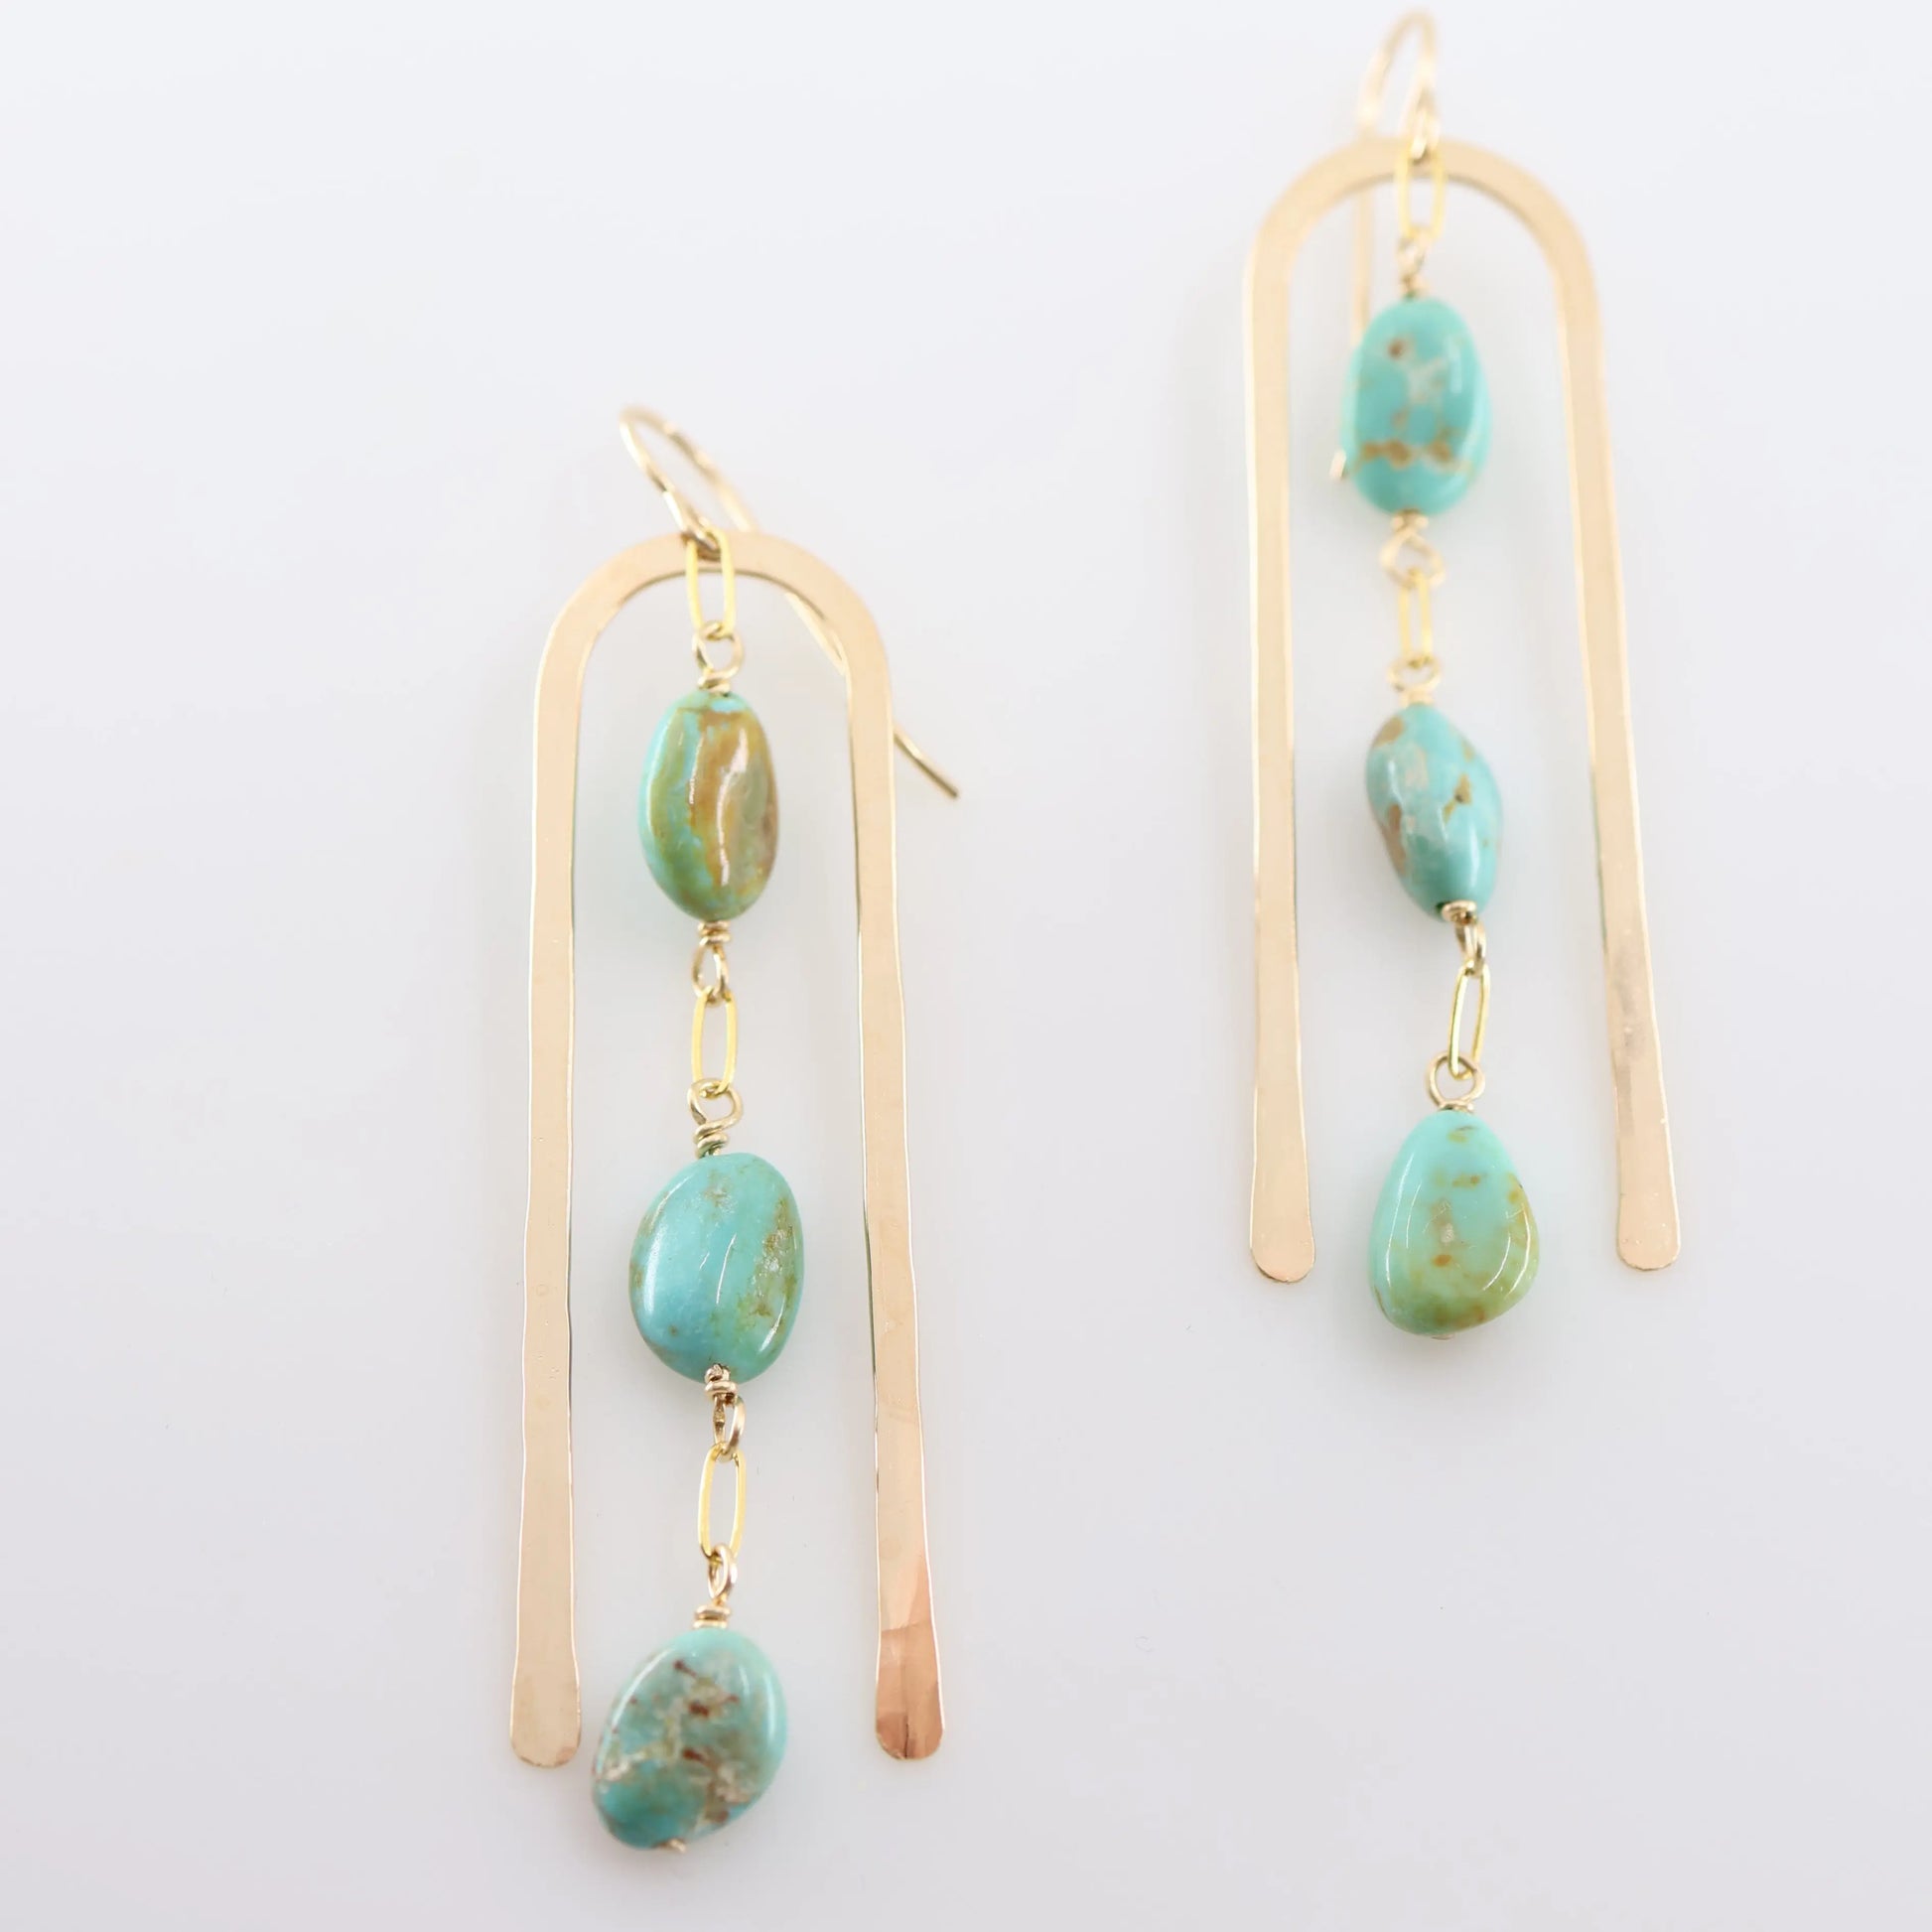 Large Arch Earring with cascading gemstones, 2 variations J.Mills Studio